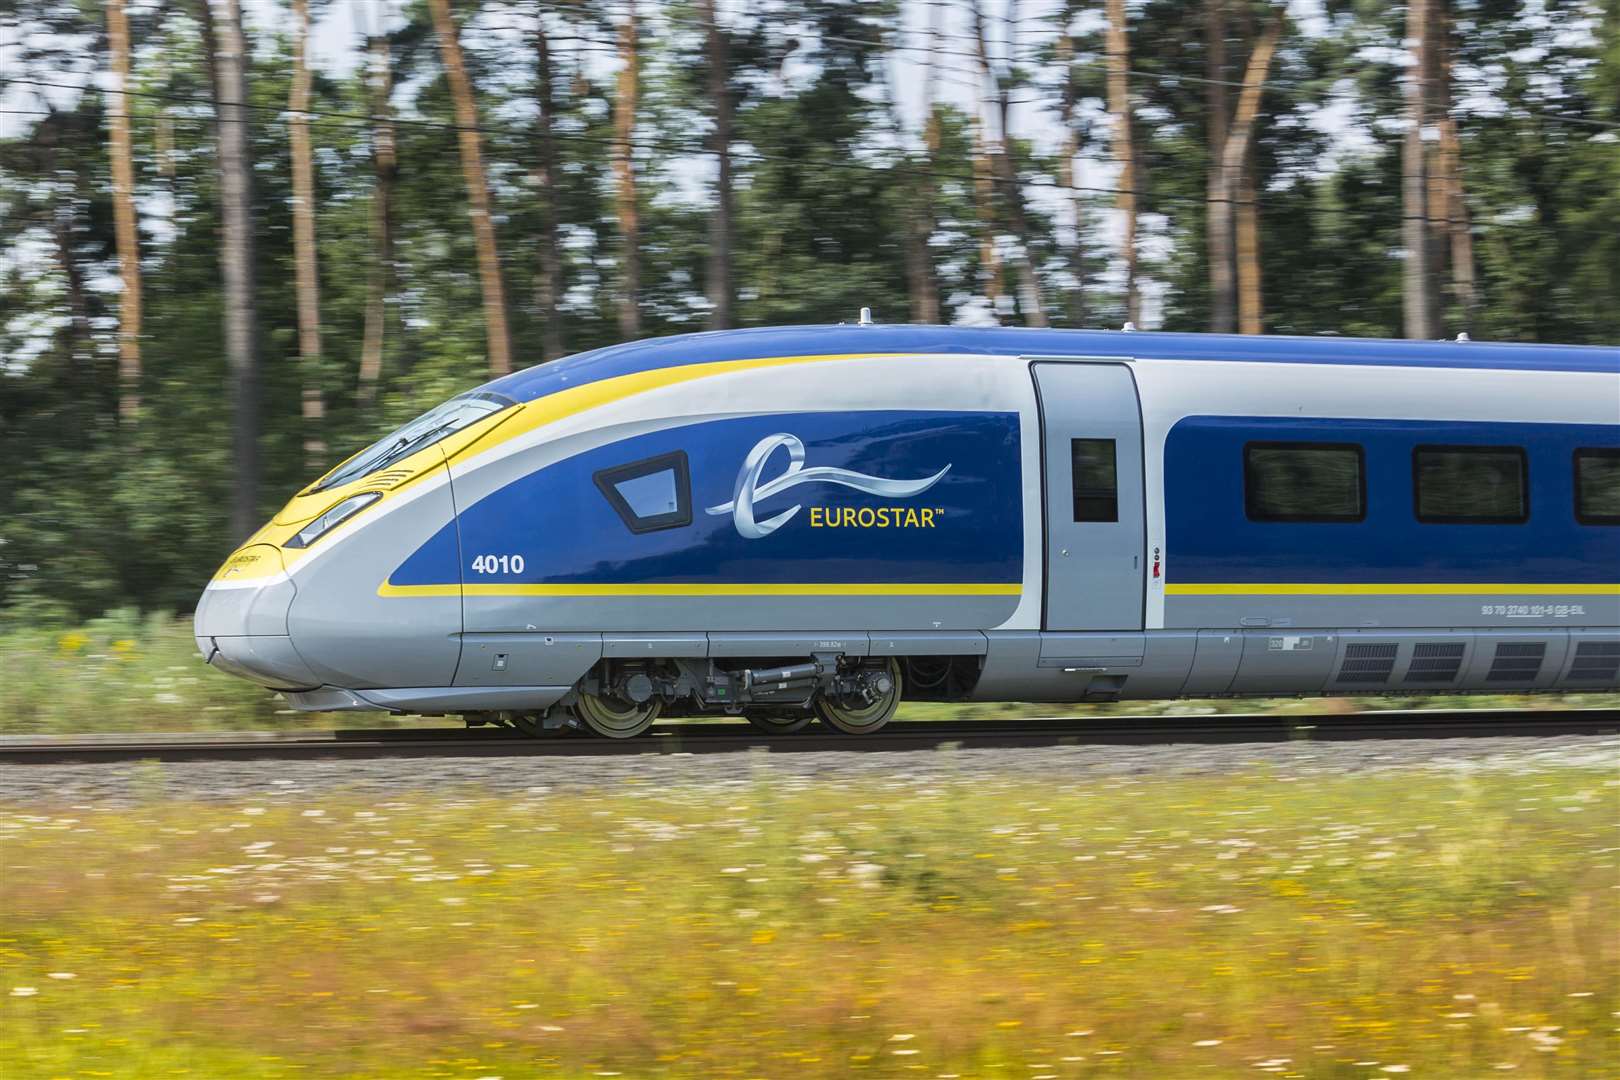 There are calls for Eurostar to return to Kent